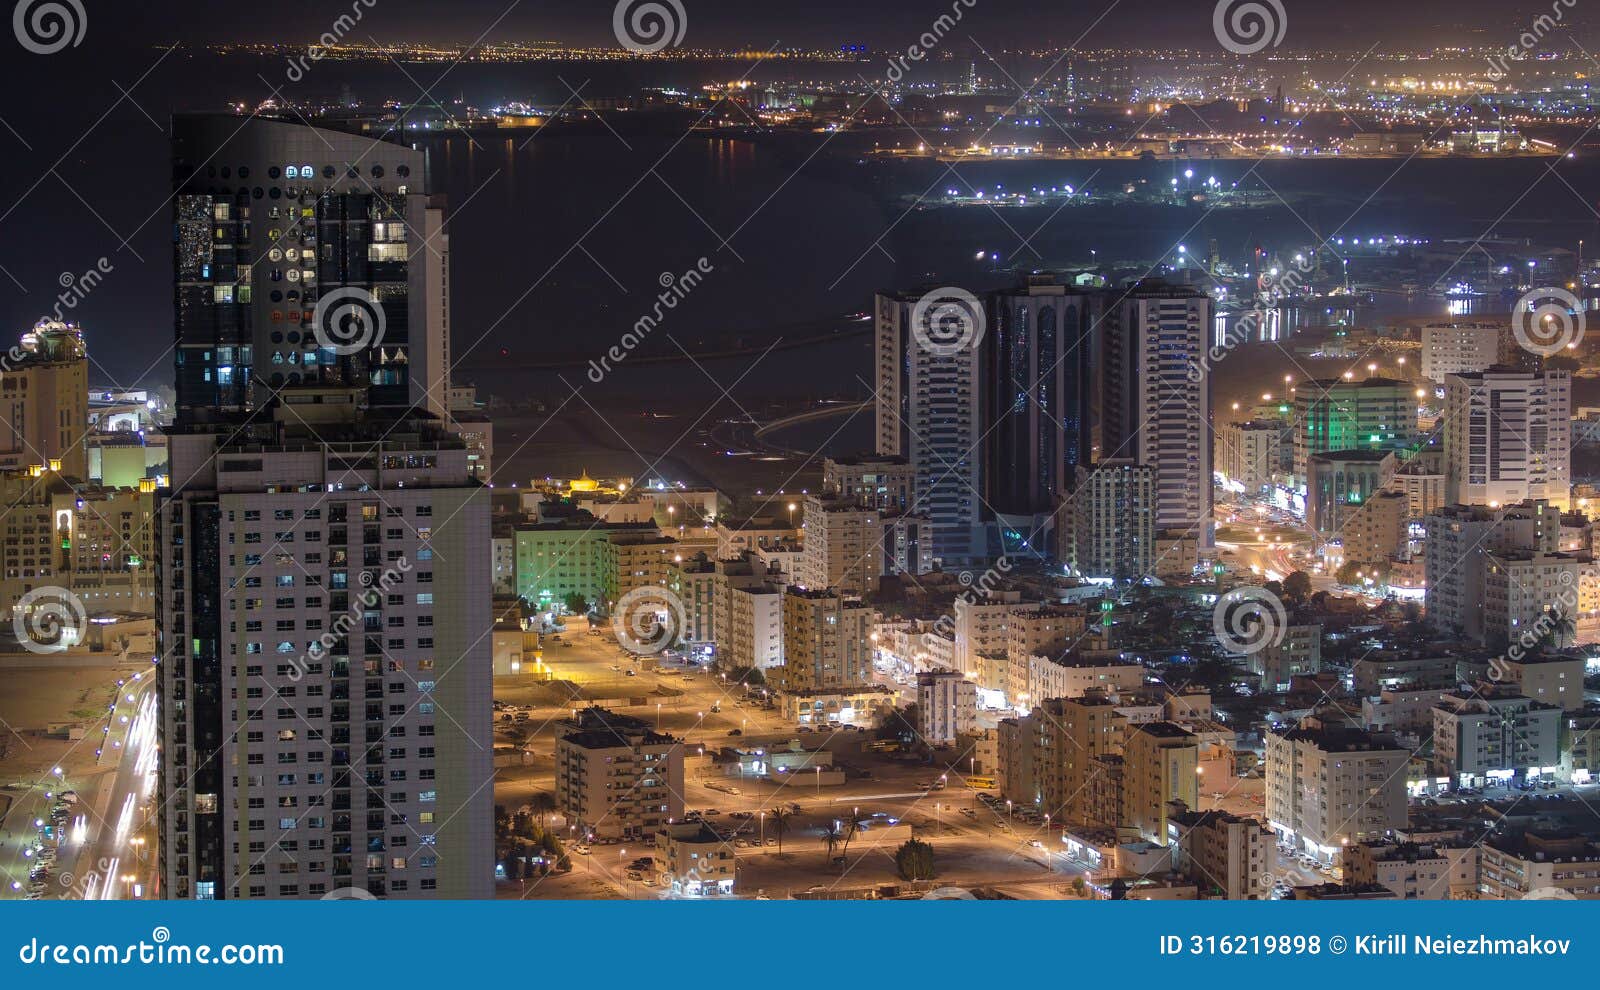 cityscape of ajman from rooftop night aerial timelapse